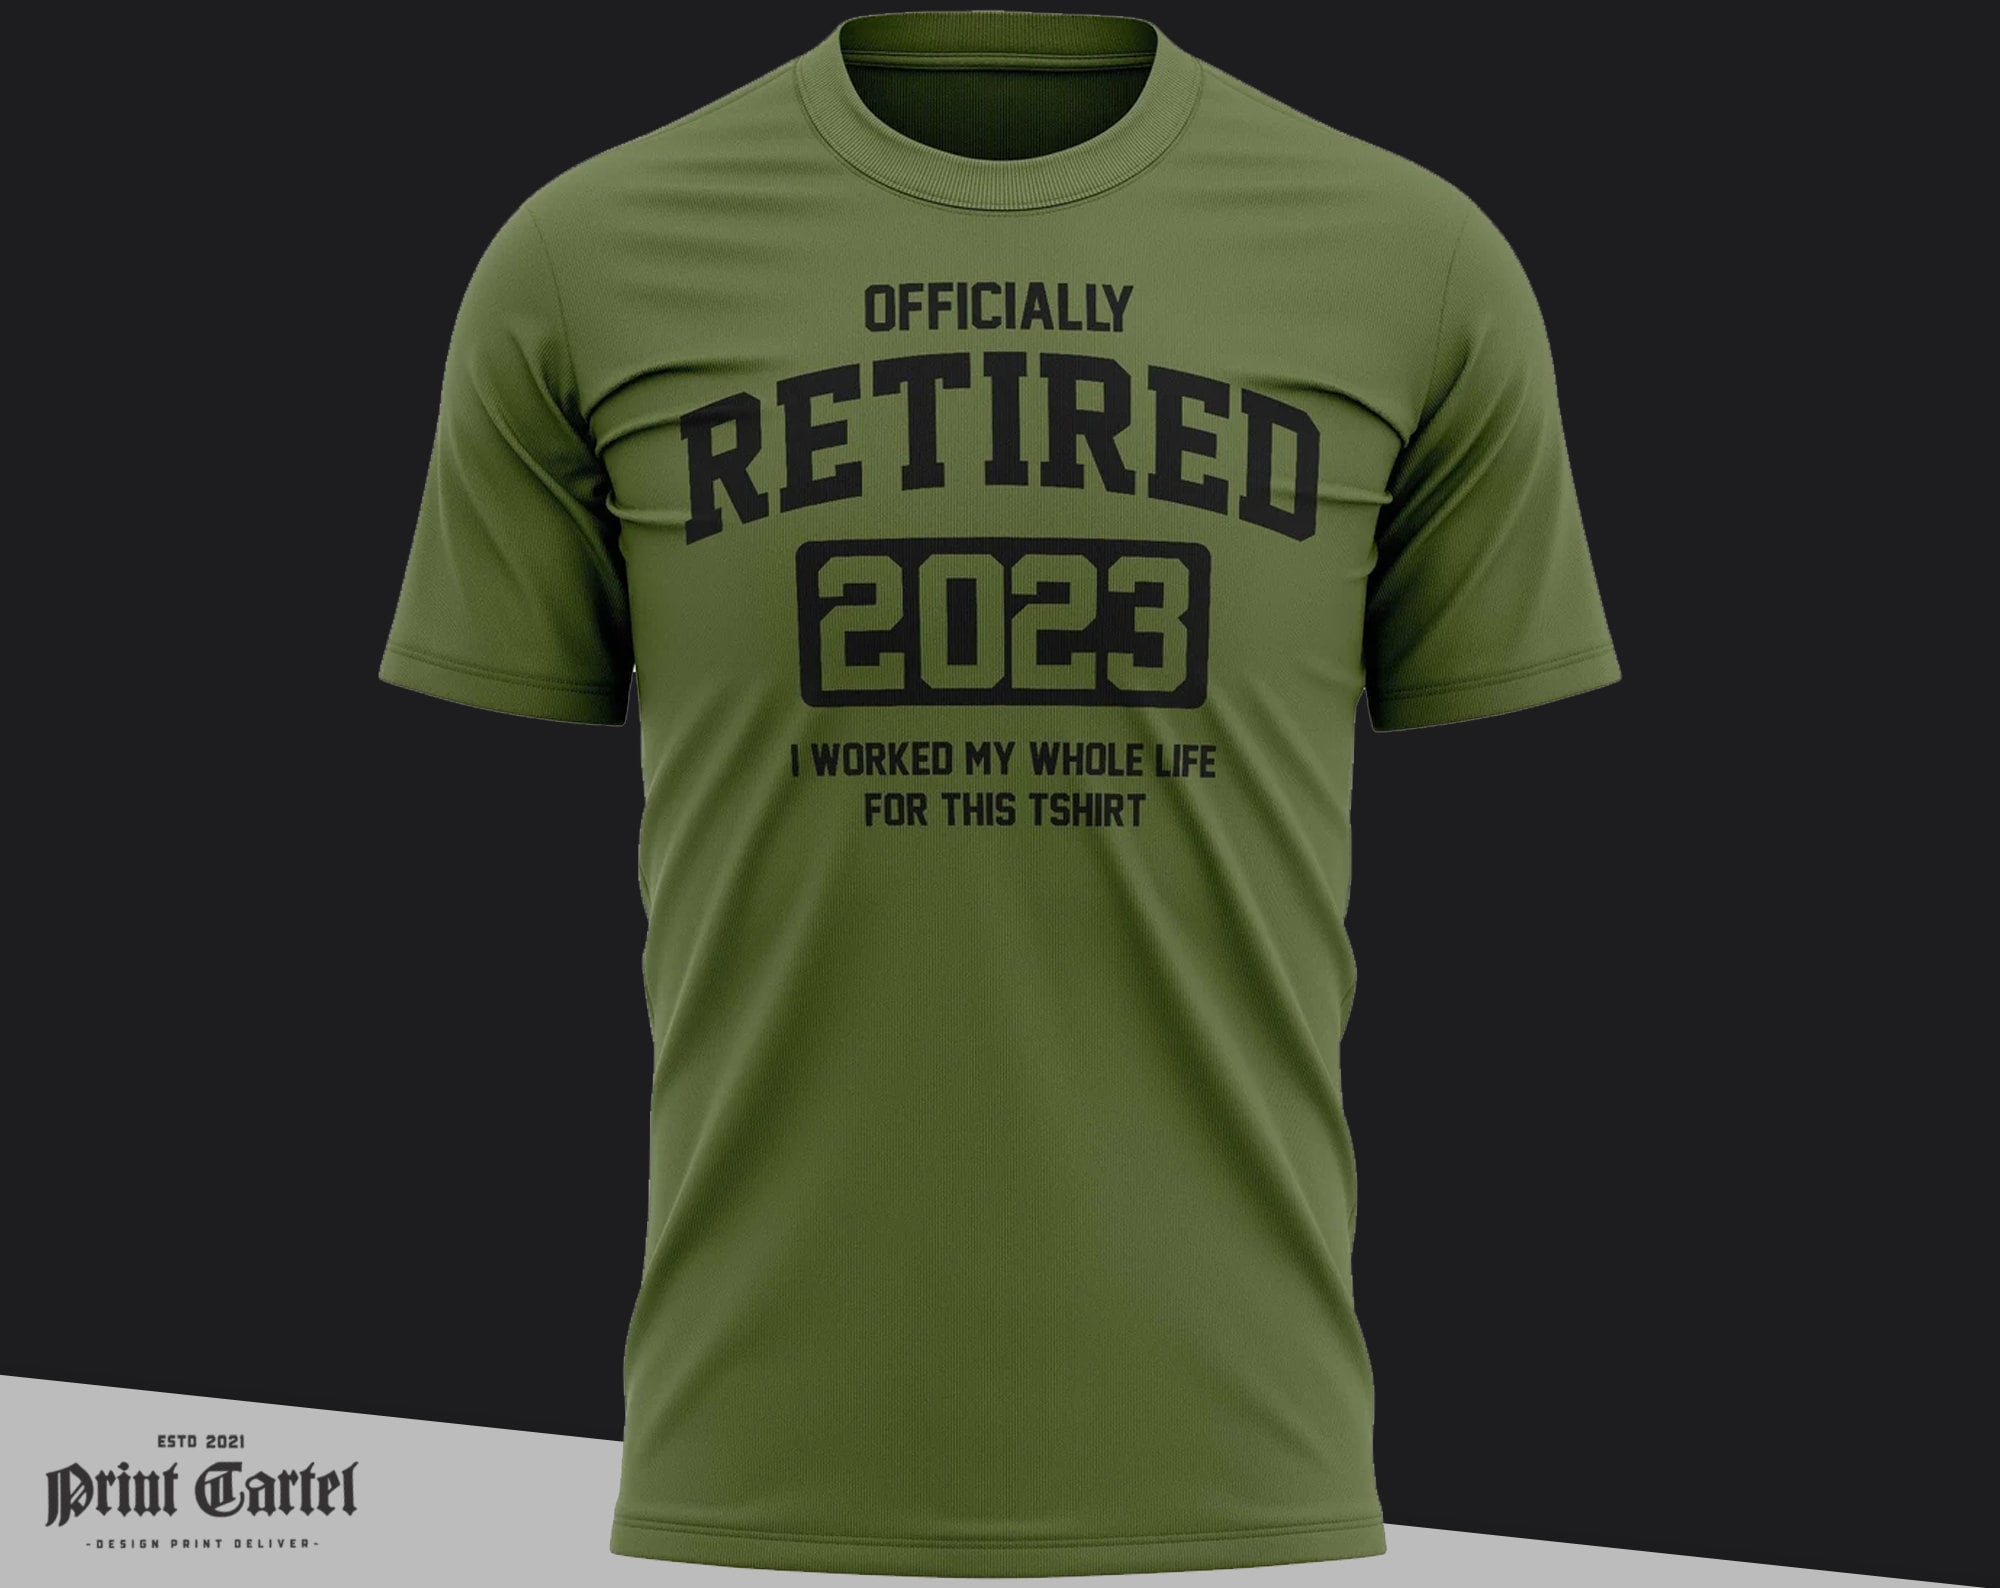 Officially Retired 2023 Funny T Shirt For Men, Retirement Gifts Him Mens Novelty Gift Wife Tee Top Tshirt, Present